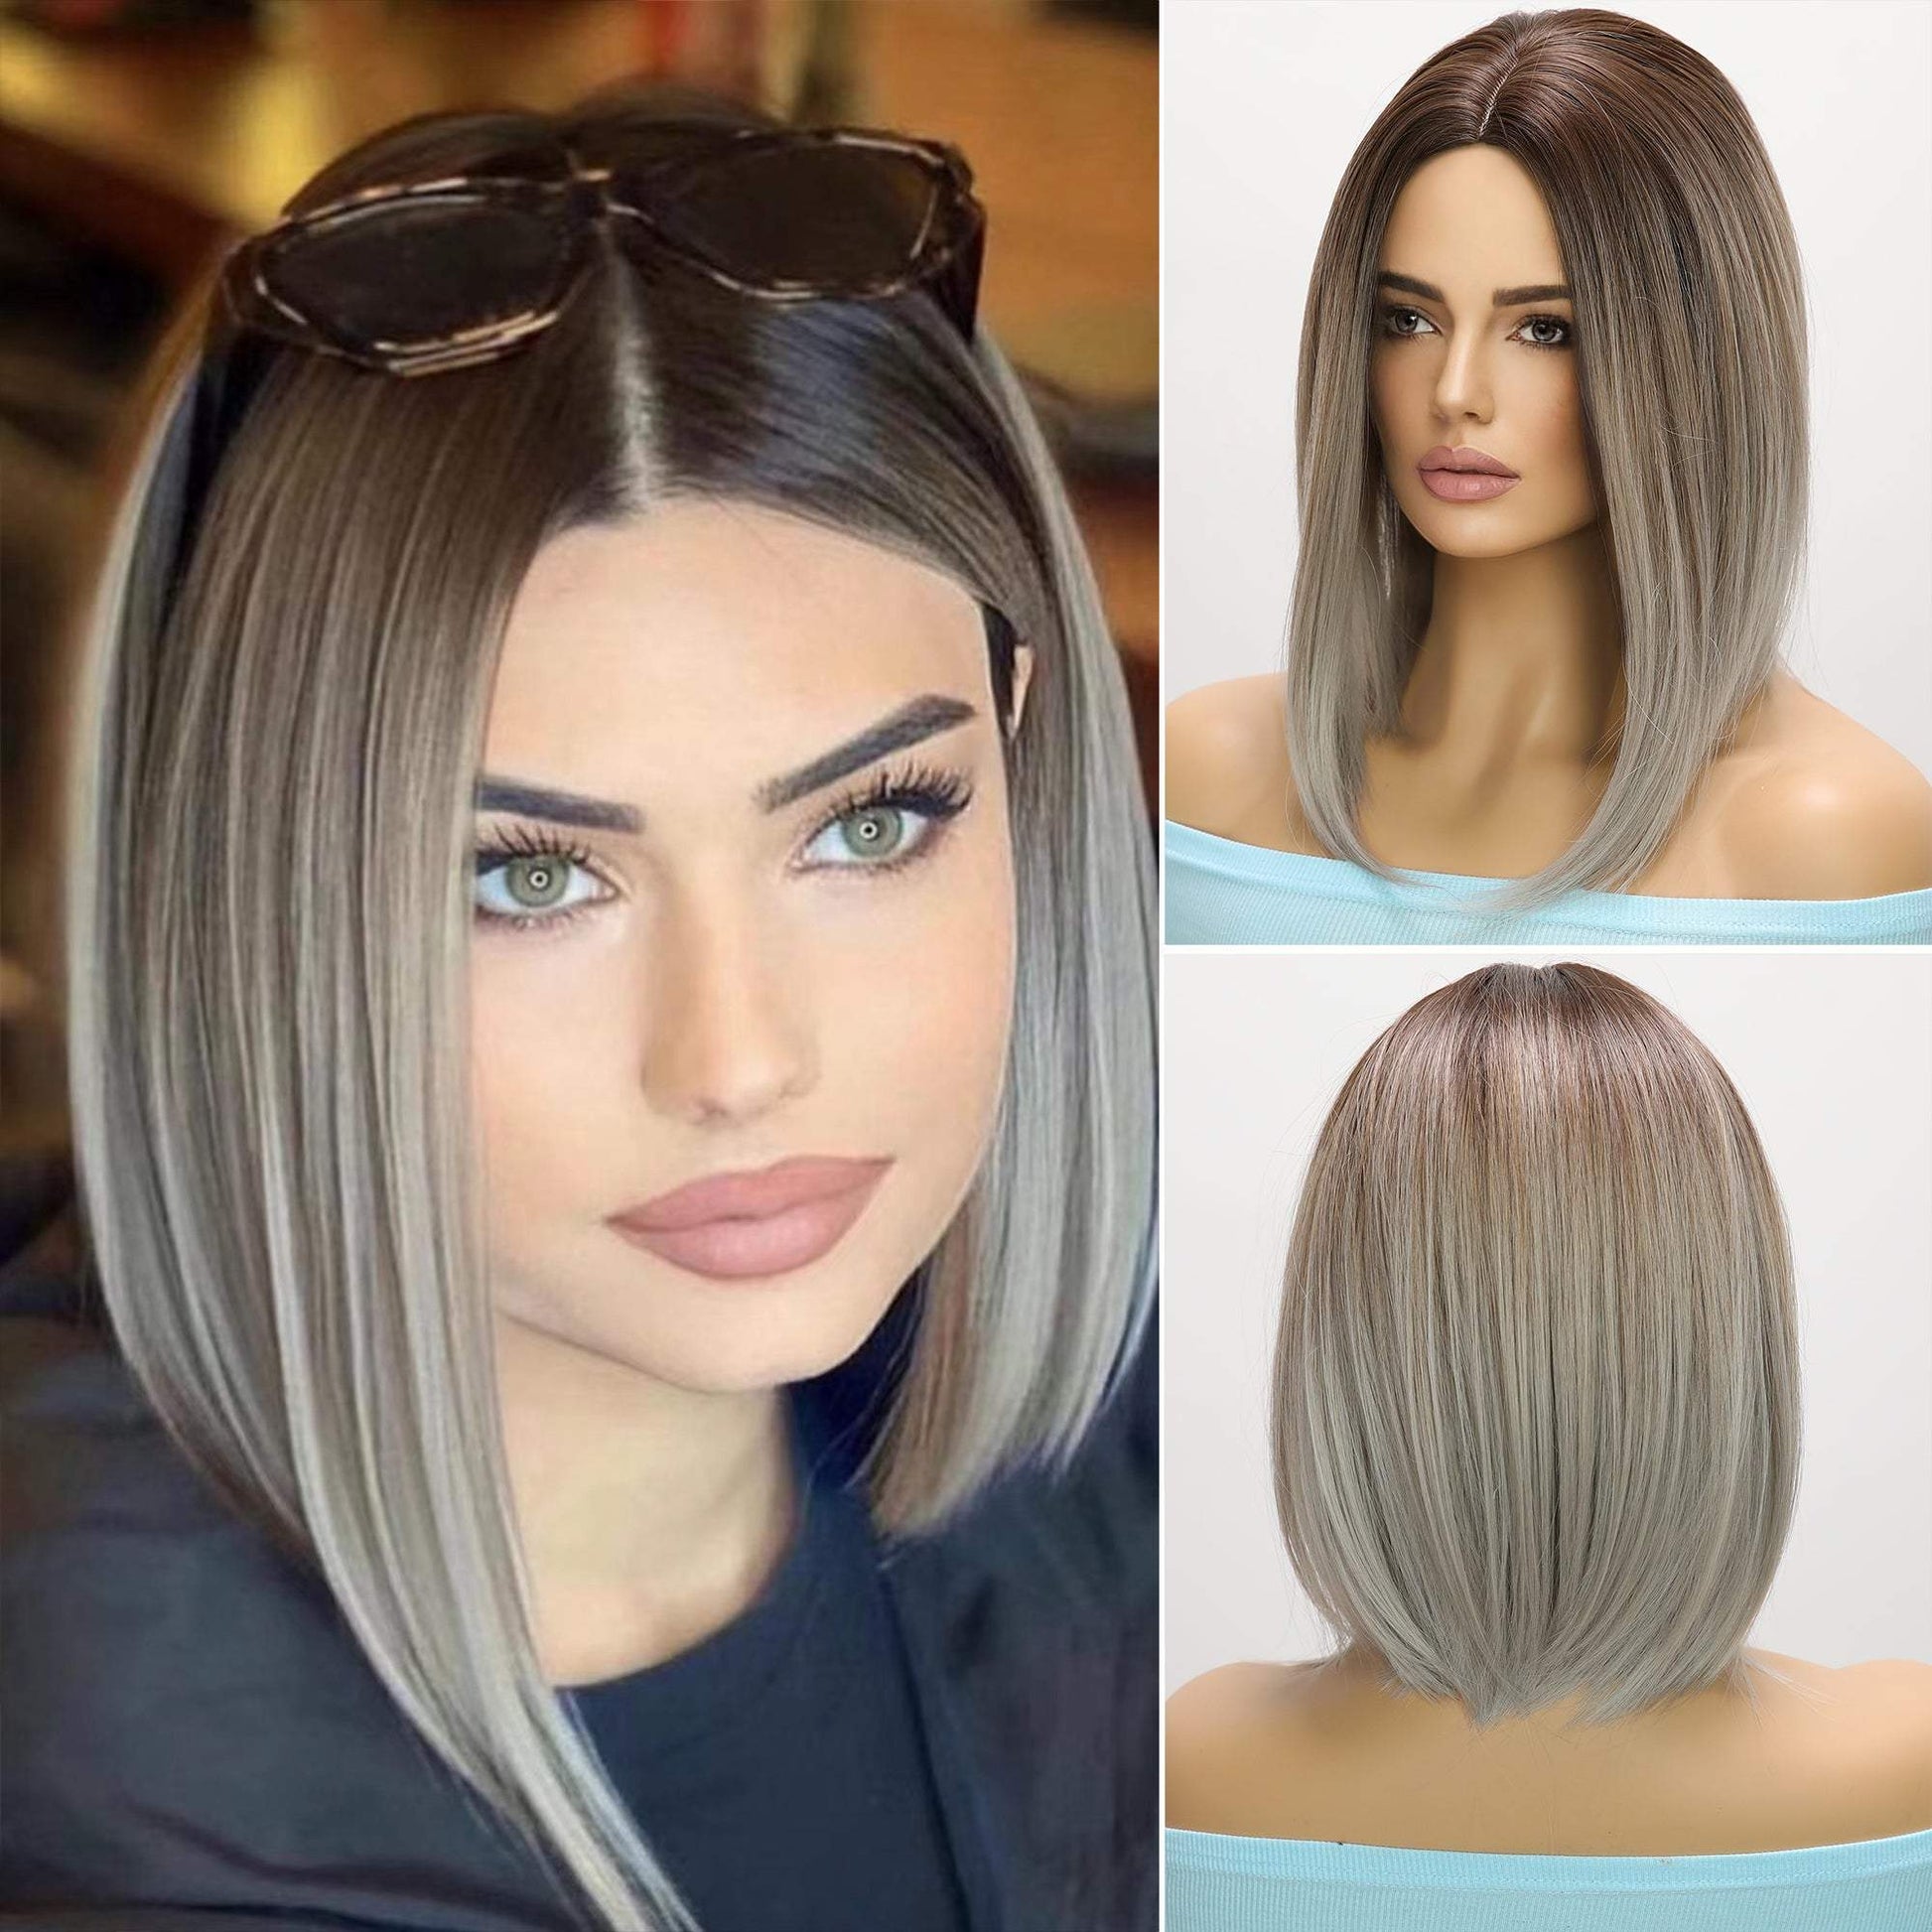 12-inch | Gray Highlight middle Part Stranght Bob | SM1639 - TapLike